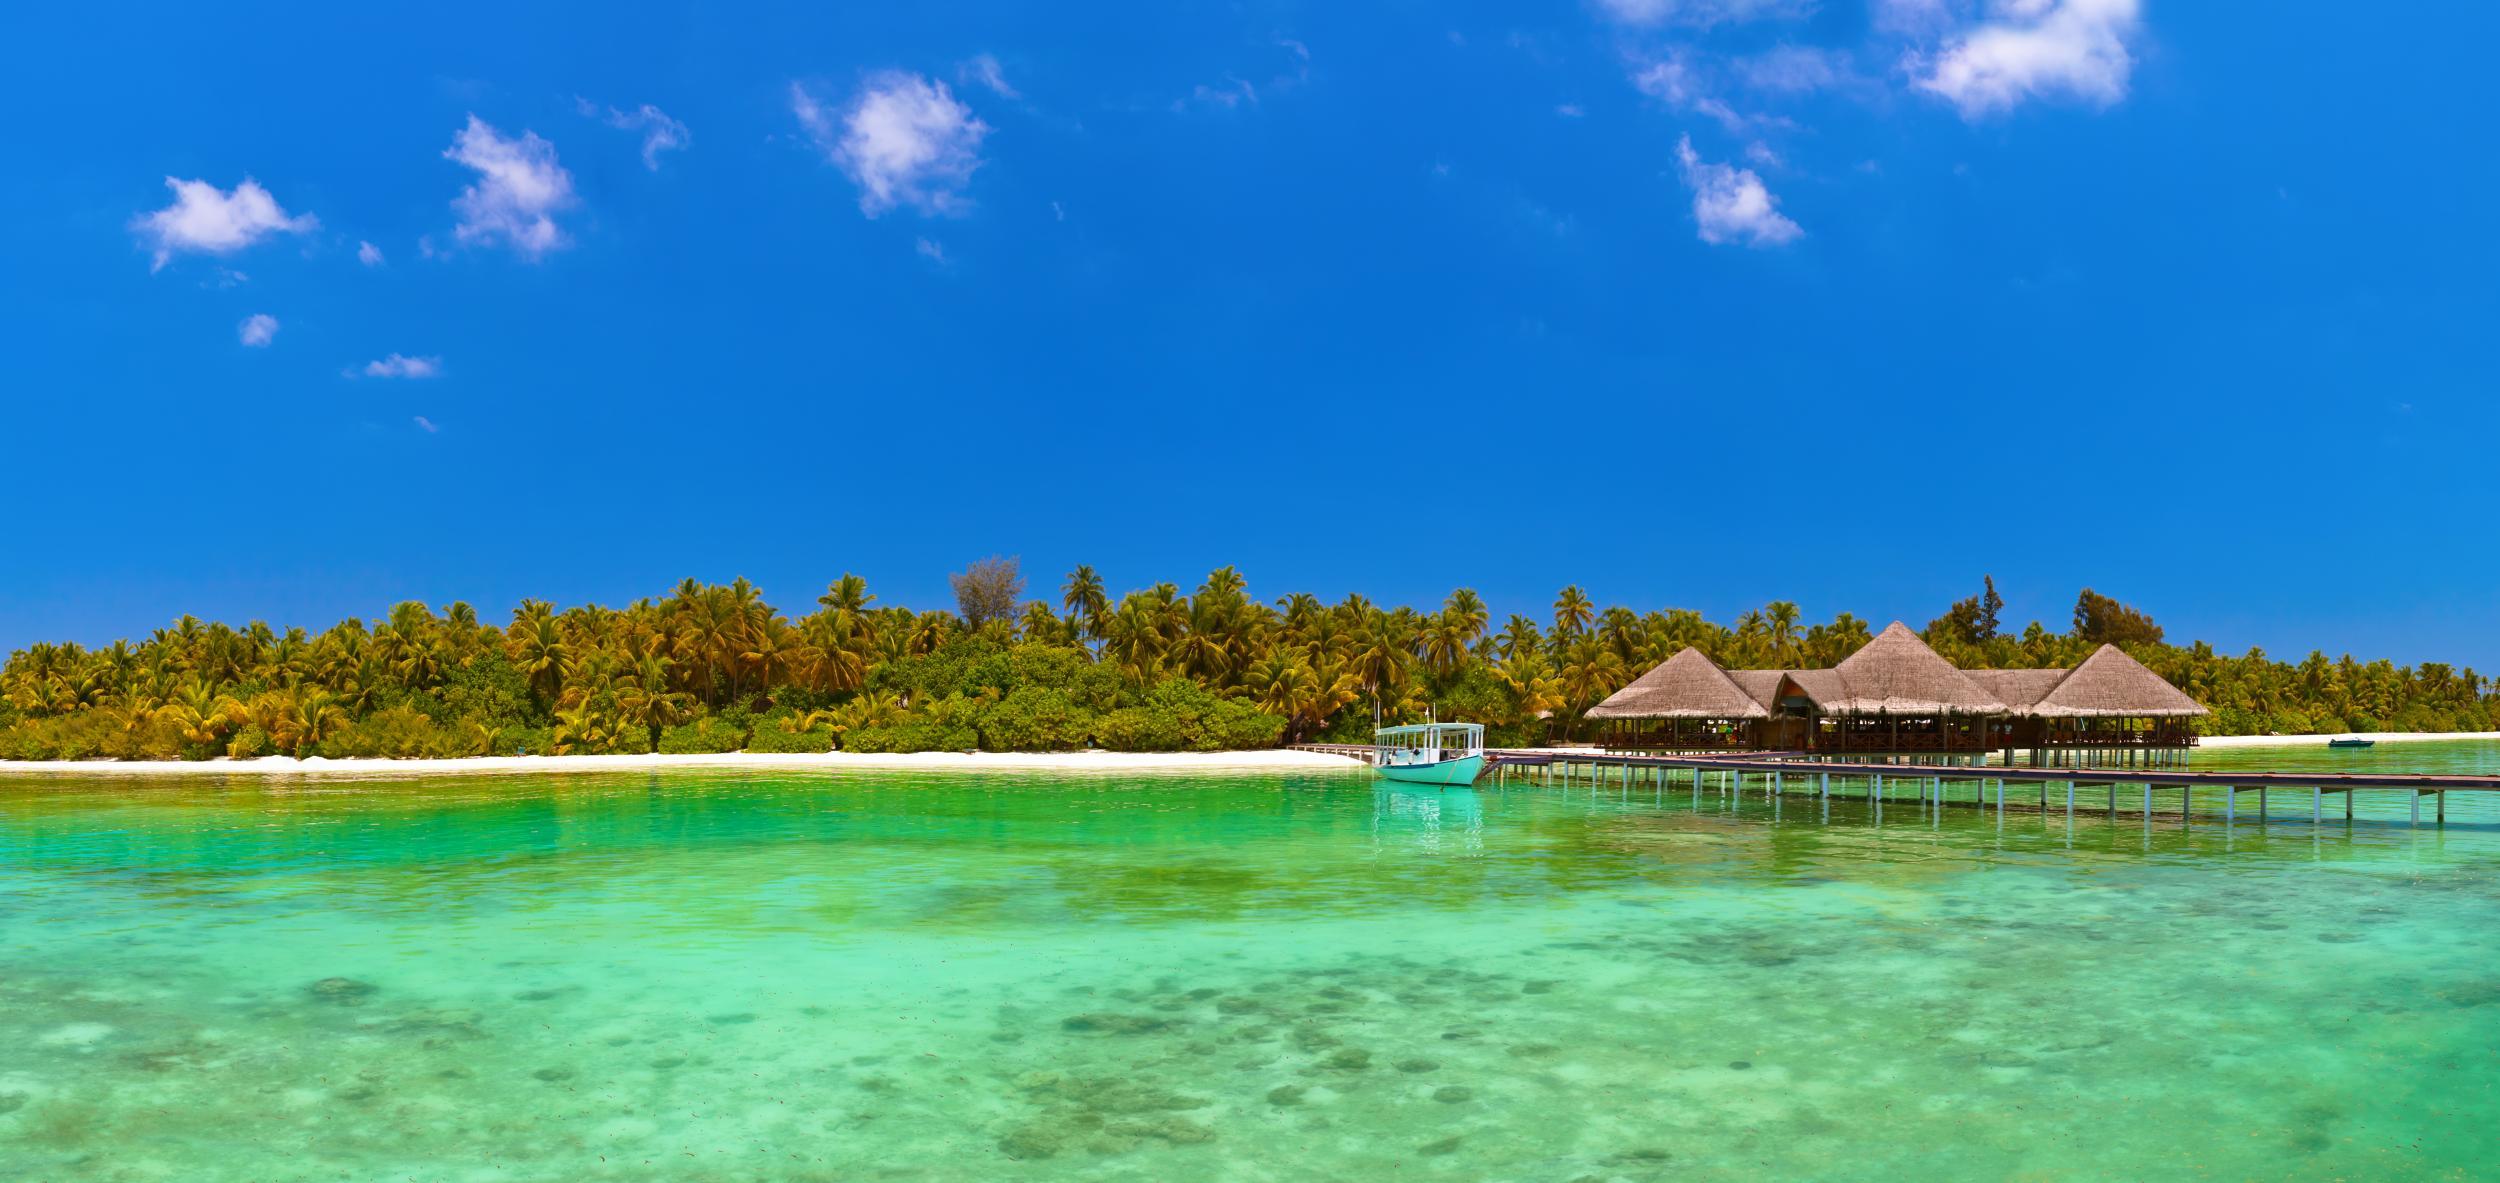 The Maldives has been chosen as a top spot for LGBT travellers, despite homosexuality being illegal there